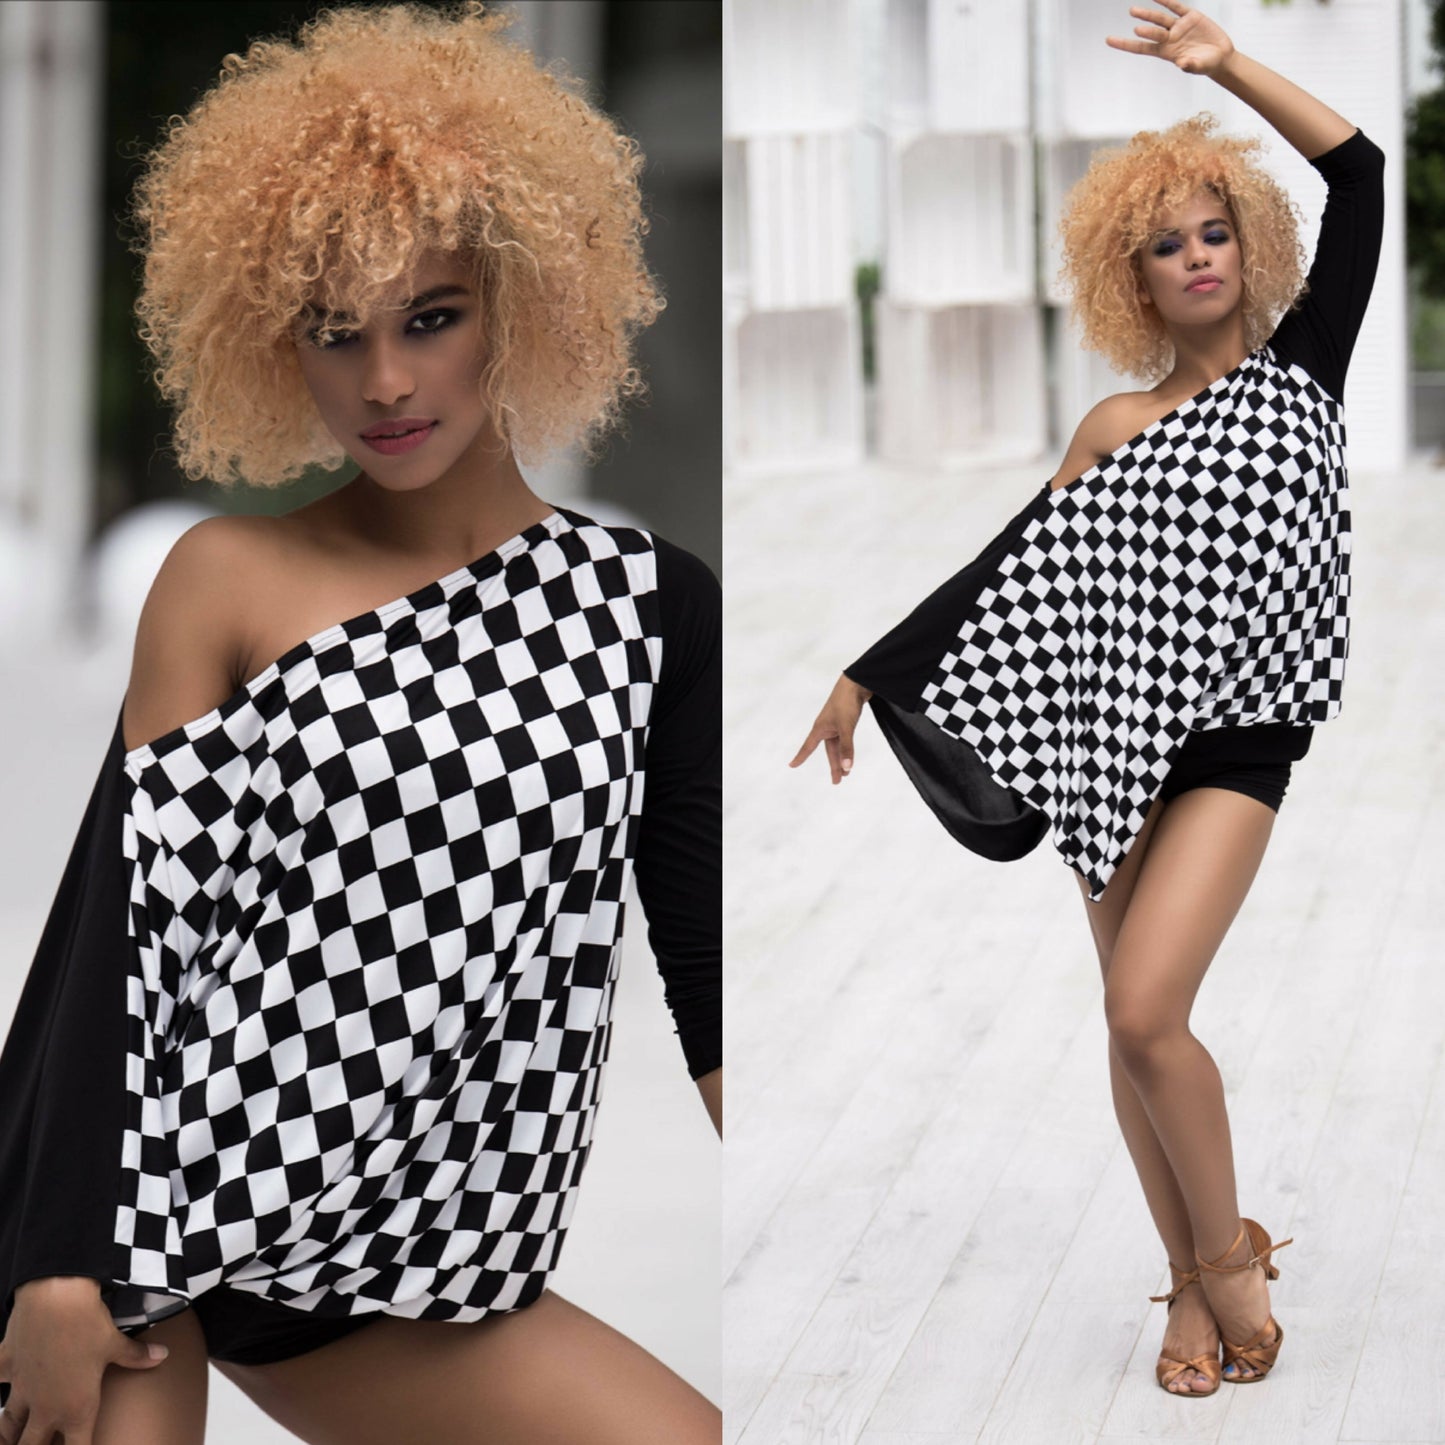 Dance Practice Blouse with loose sleeve and a bare shoulder, Senga Dancewear 